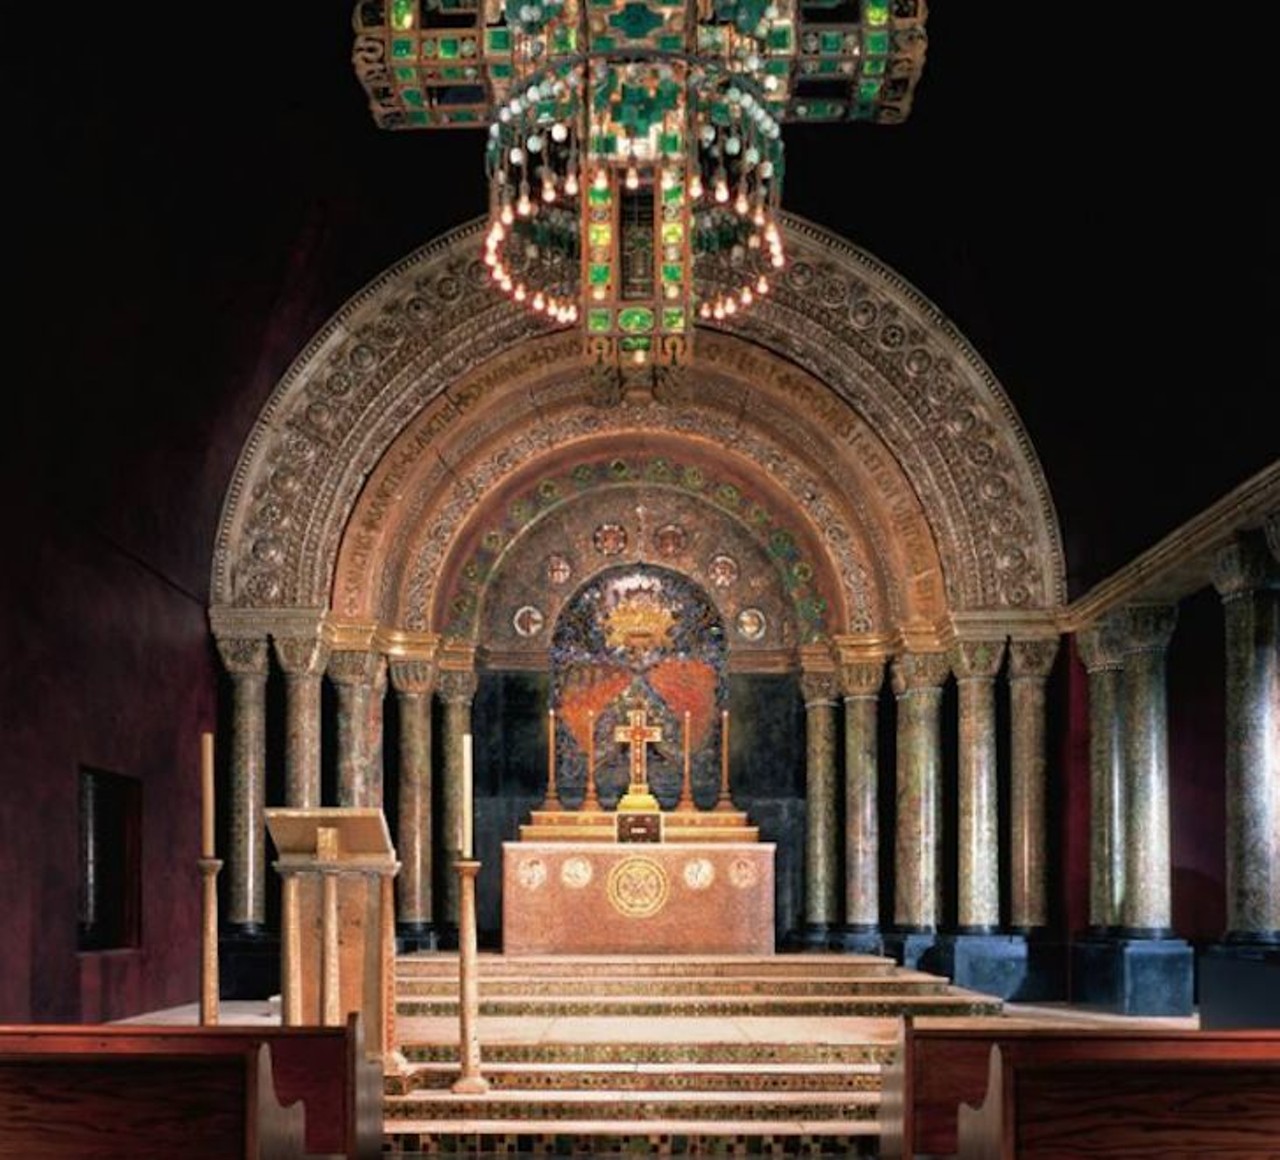 Tiffany Chapel
445 N. Park Ave., Winter Park, (407) 645-5311
After it was left abandoned and decaying, careful reconstruction work at the Morse Museum allowed the Tiffany Chapel to return to its former glory, giving every Orlandoan a chance to step into a work of stained glass art. 
Photo via Charles Hosmer Morse Museum/Facebook